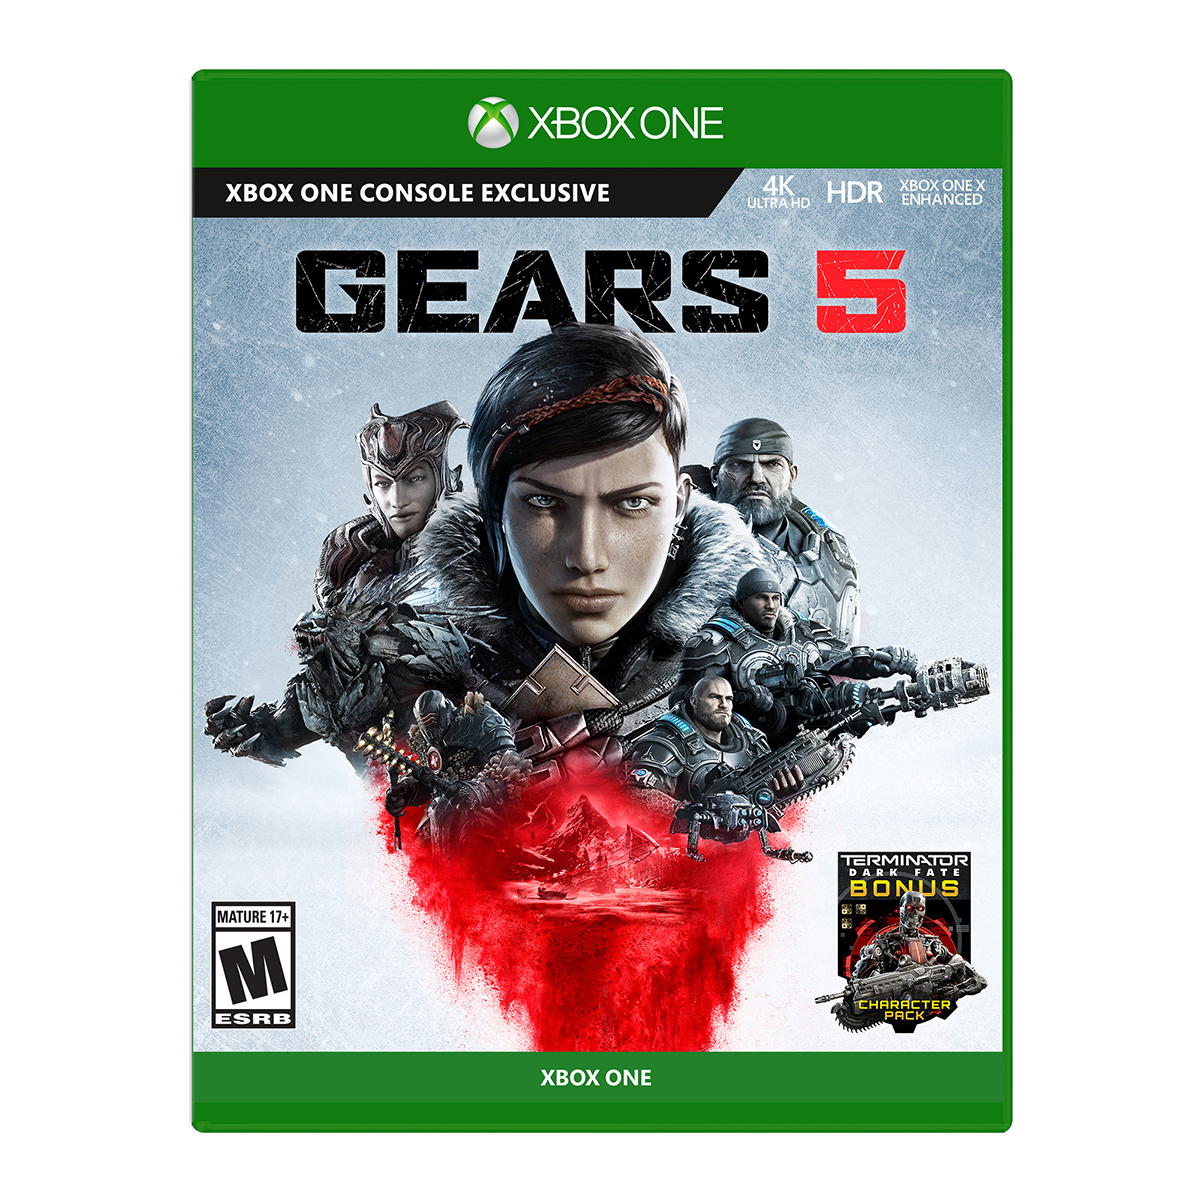 Gears 5 (Xbox One Exclusive) $10 + shipping at Walmart